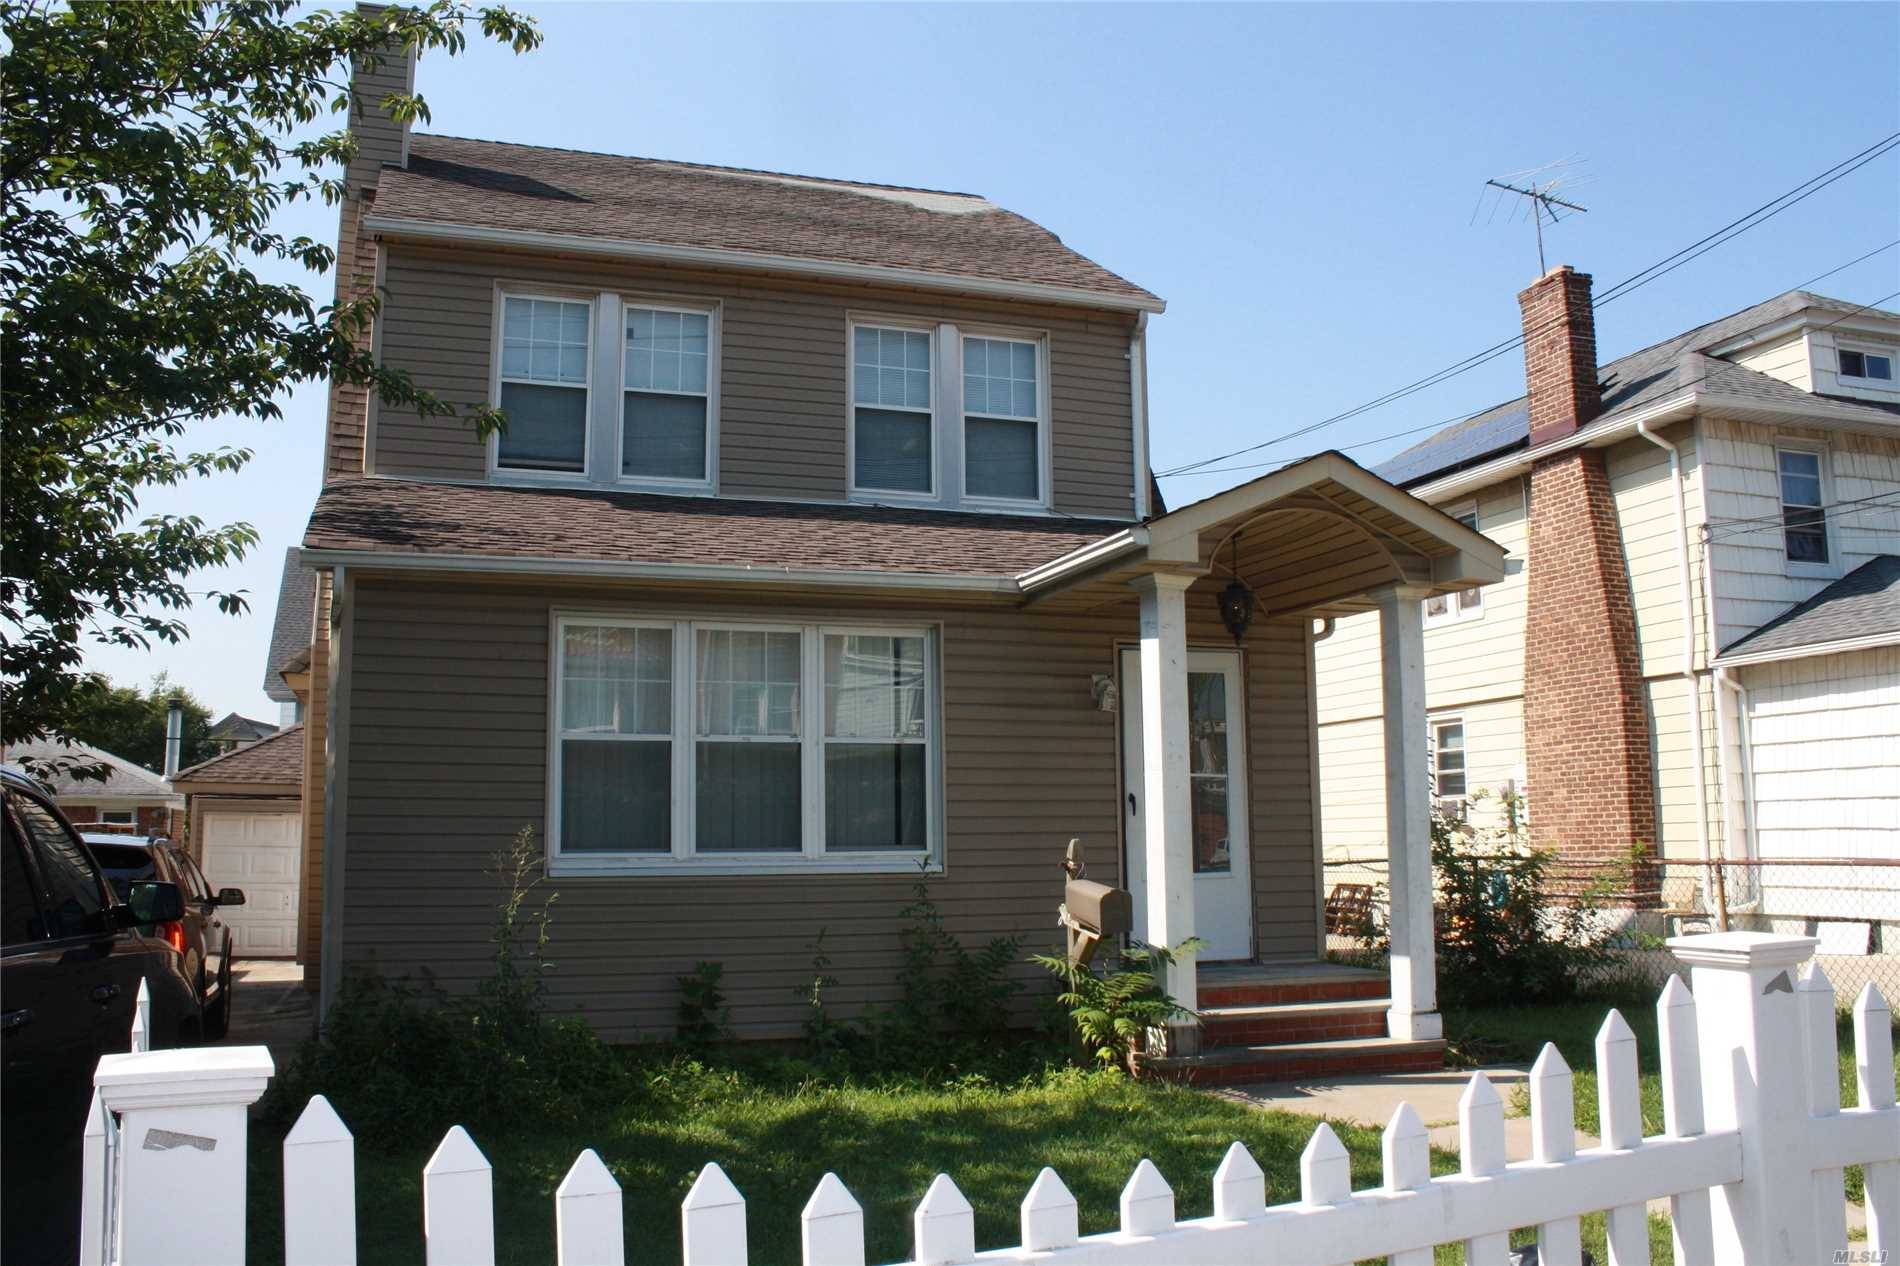 This Single Family House Is  Located In The Prime Flushing  Area Located Near Kissena Park, Schools And Transportation (Q26, 27 And Q65 Buses).